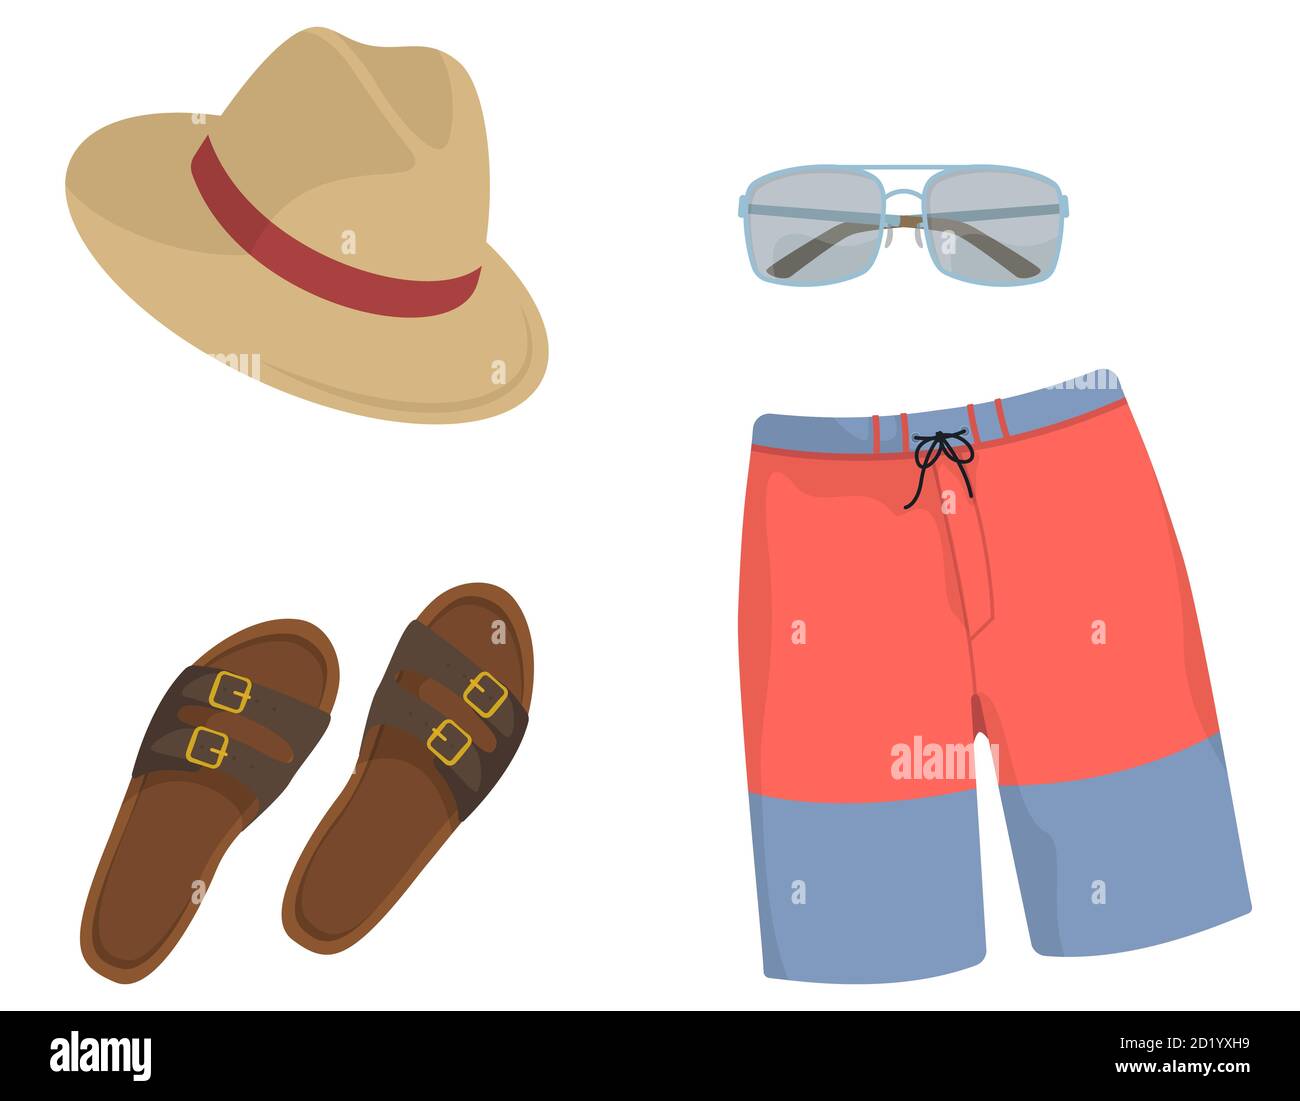 https://c8.alamy.com/comp/2D1YXH9/mens-clothing-and-accessories-beach-collection-in-cartoon-style-2D1YXH9.jpg